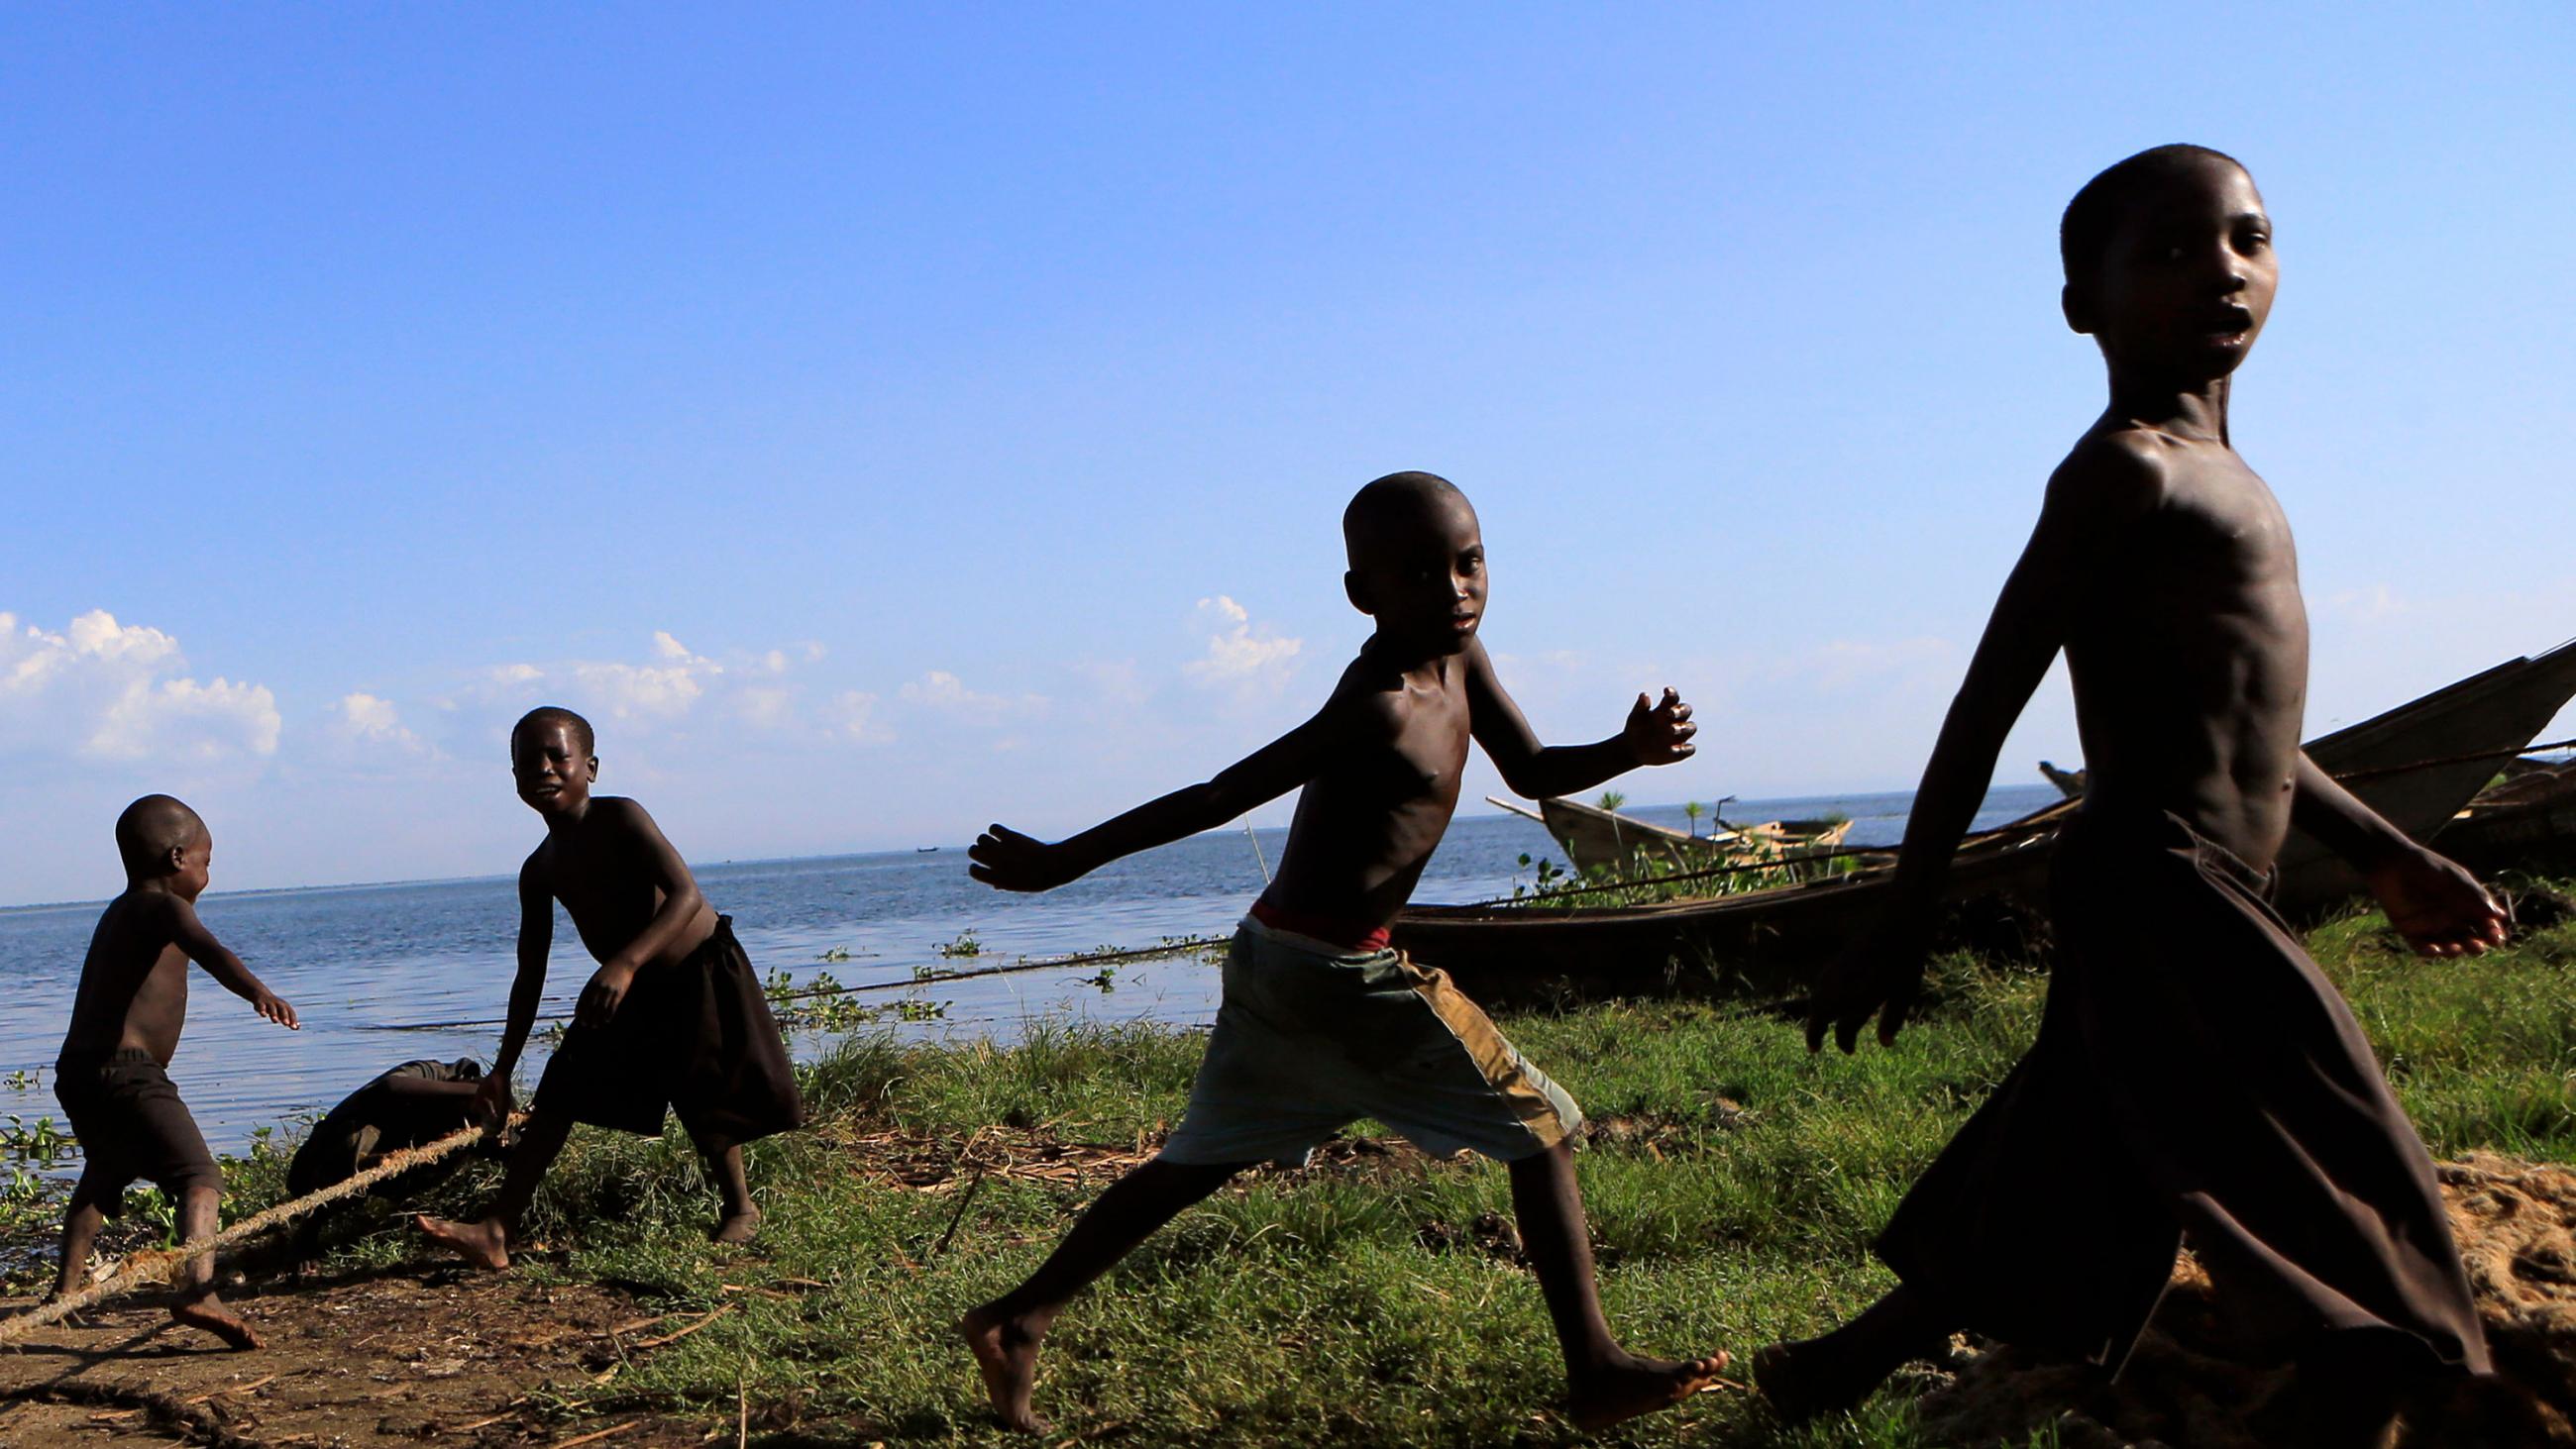 Children play along the shores of Lake Albert in Panyimur fishing village, north of Uganda's capital Kampala on November 30, 2013. Photo shows four boys in the approximate 5- to 10-year old age range running around a number of small fishing boats pulled up on shore.  